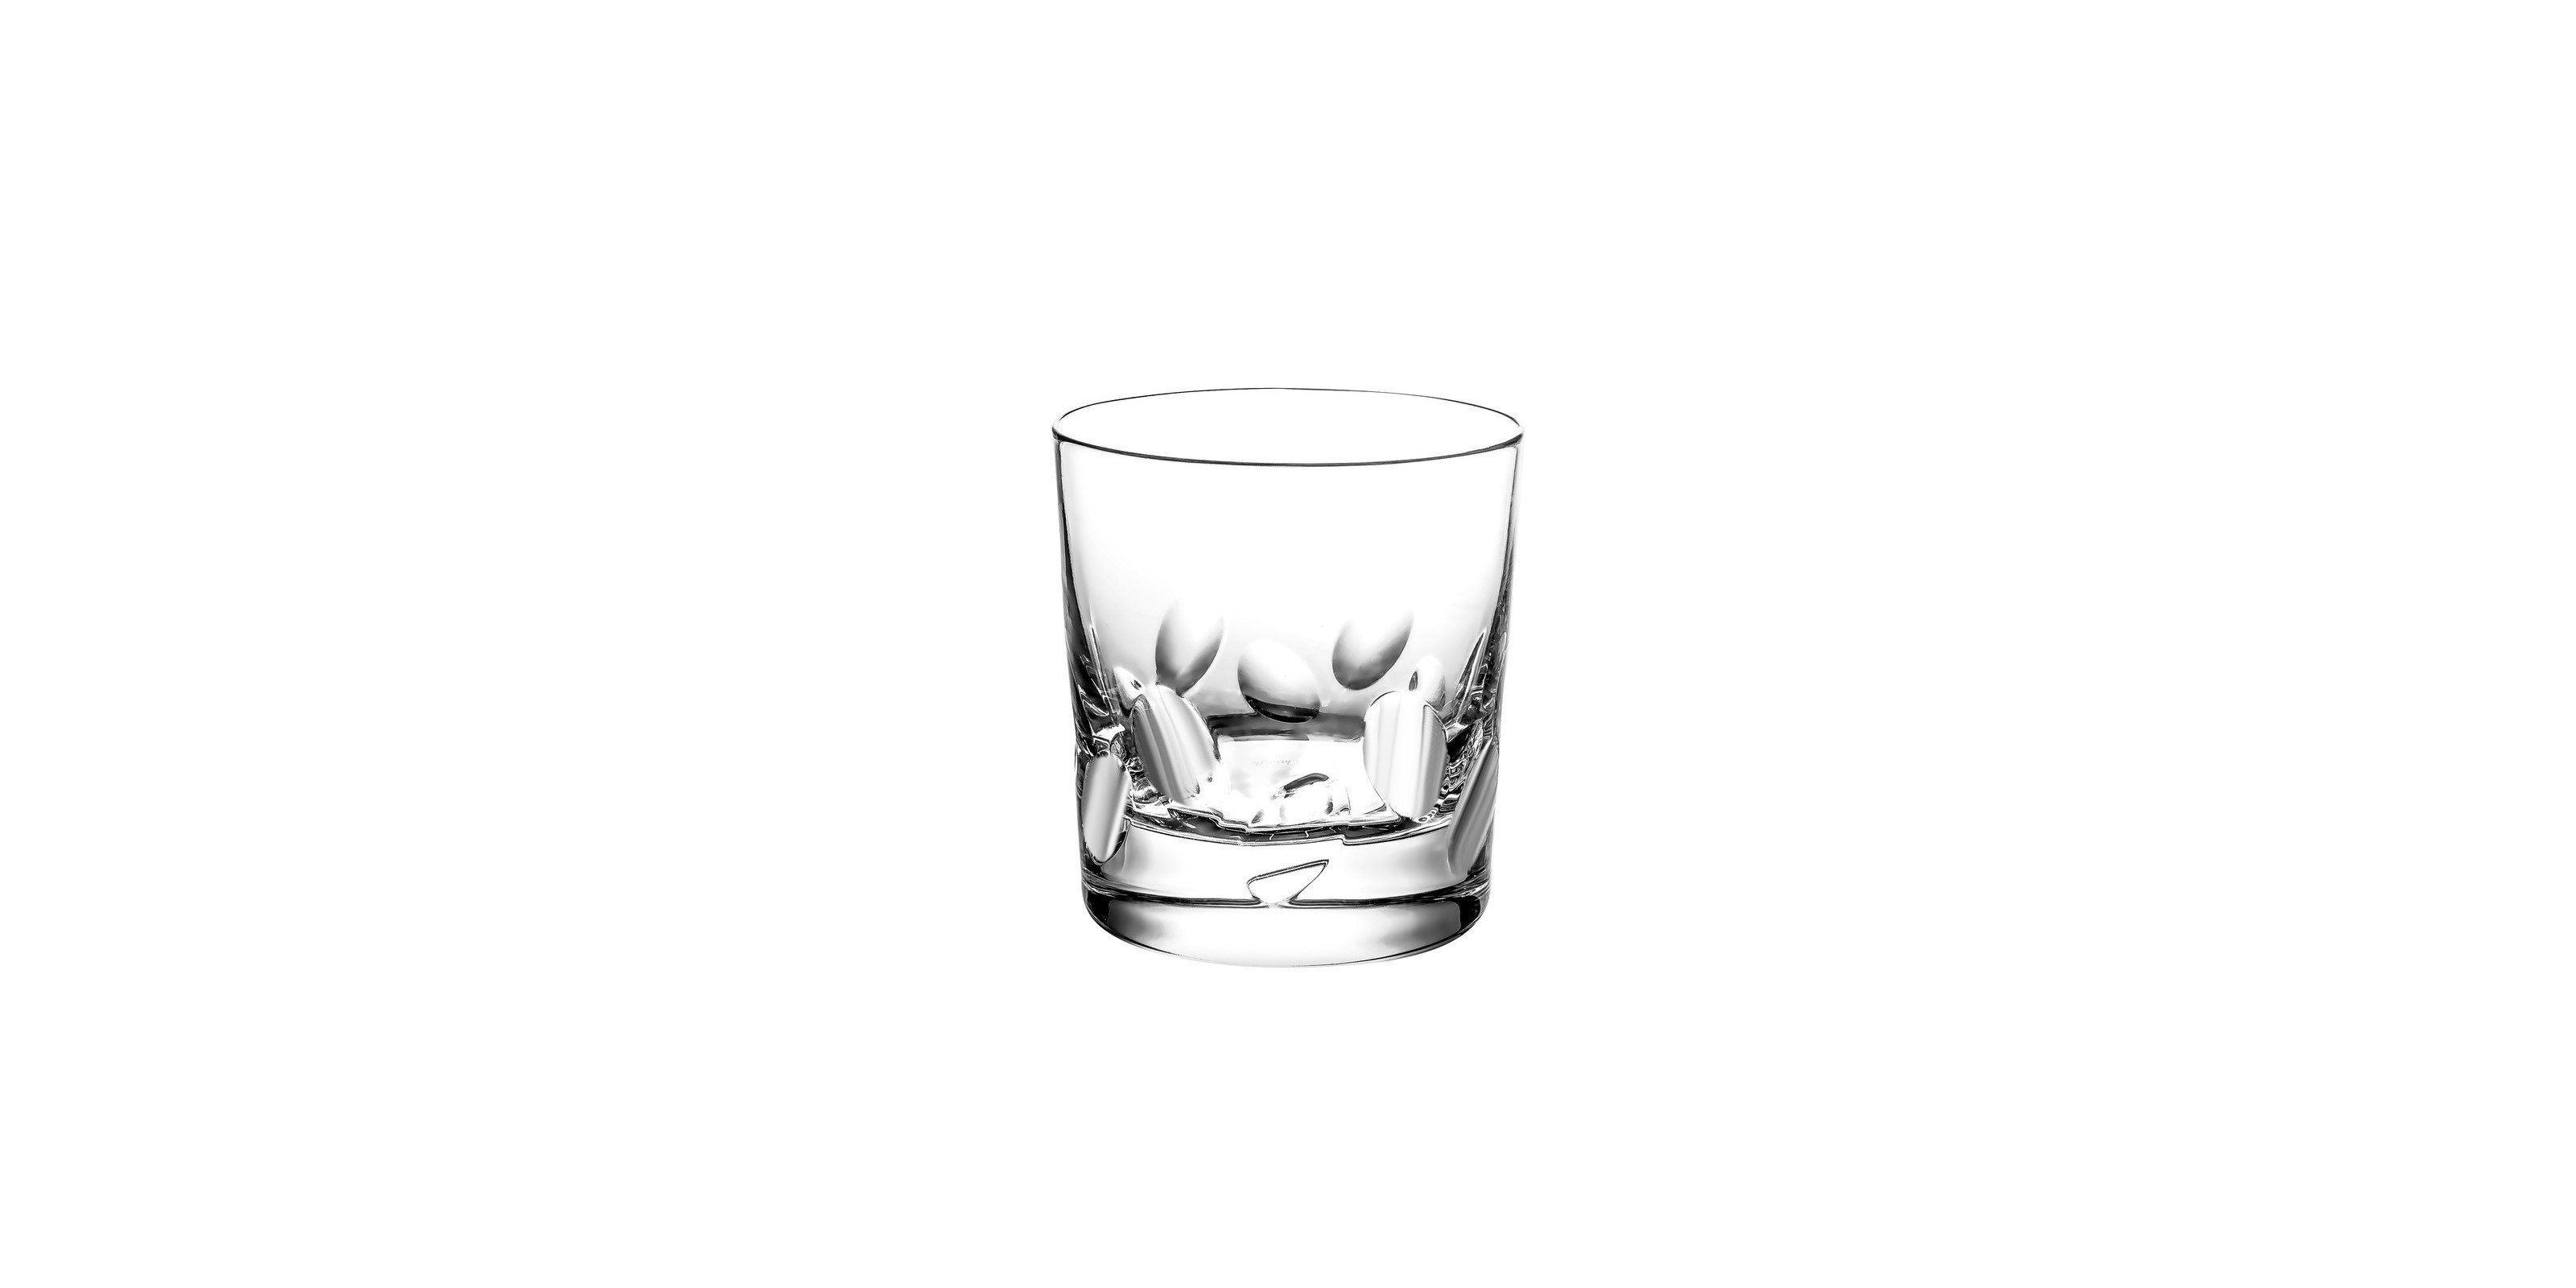 20 attractive Christofle Uni Vase 2024 free download christofle uni vase of cluny crystal double old fashioned glass luxury glassware regarding diminuer le zoom